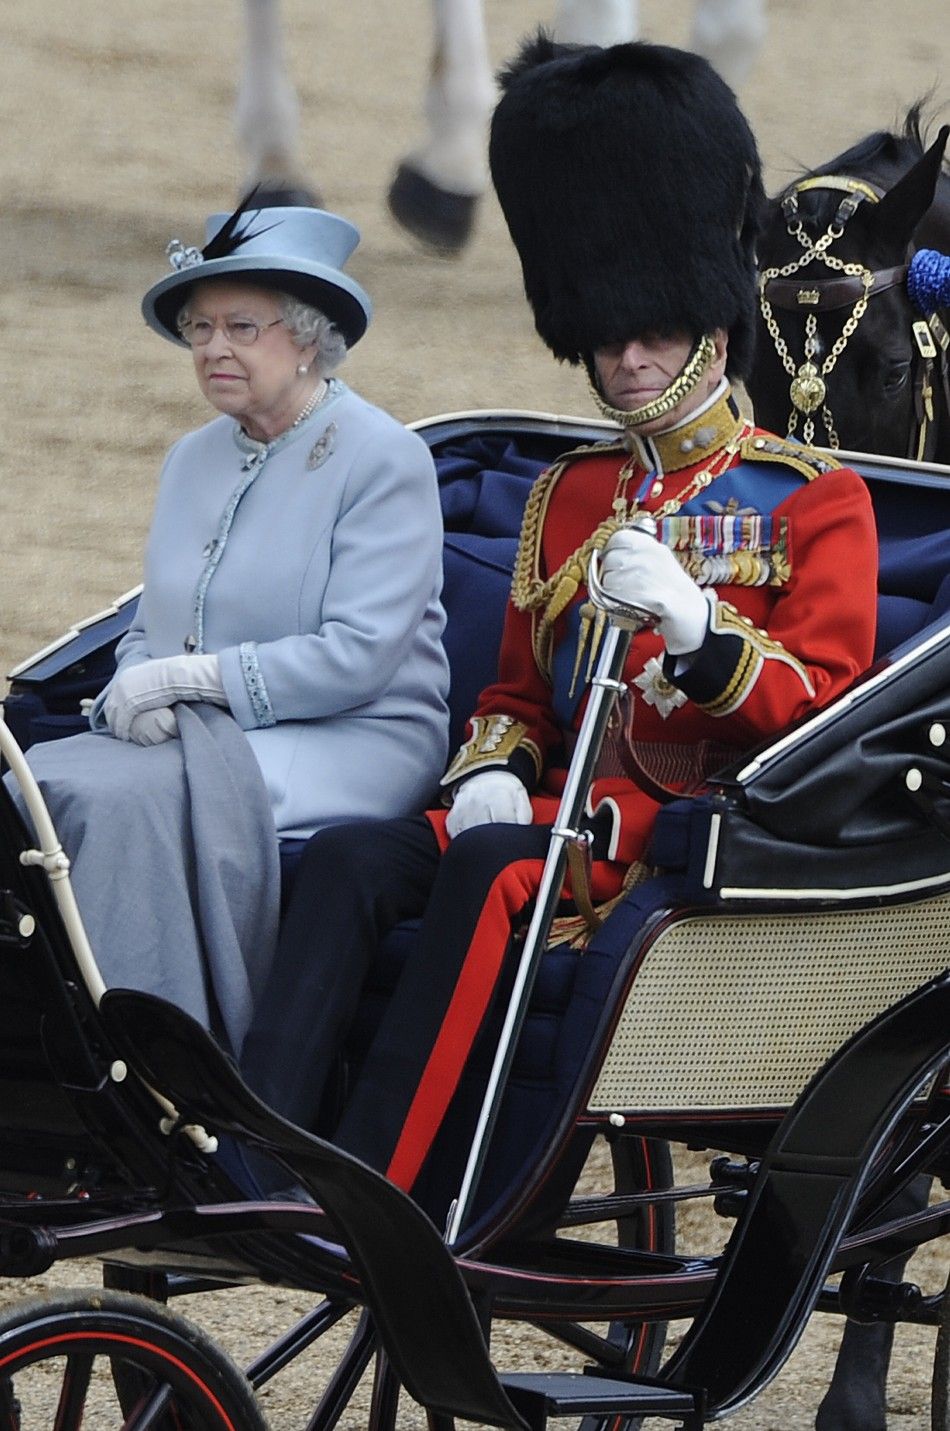 Stunning Kate Middleton celebrates Trooping the Colour in regal style.